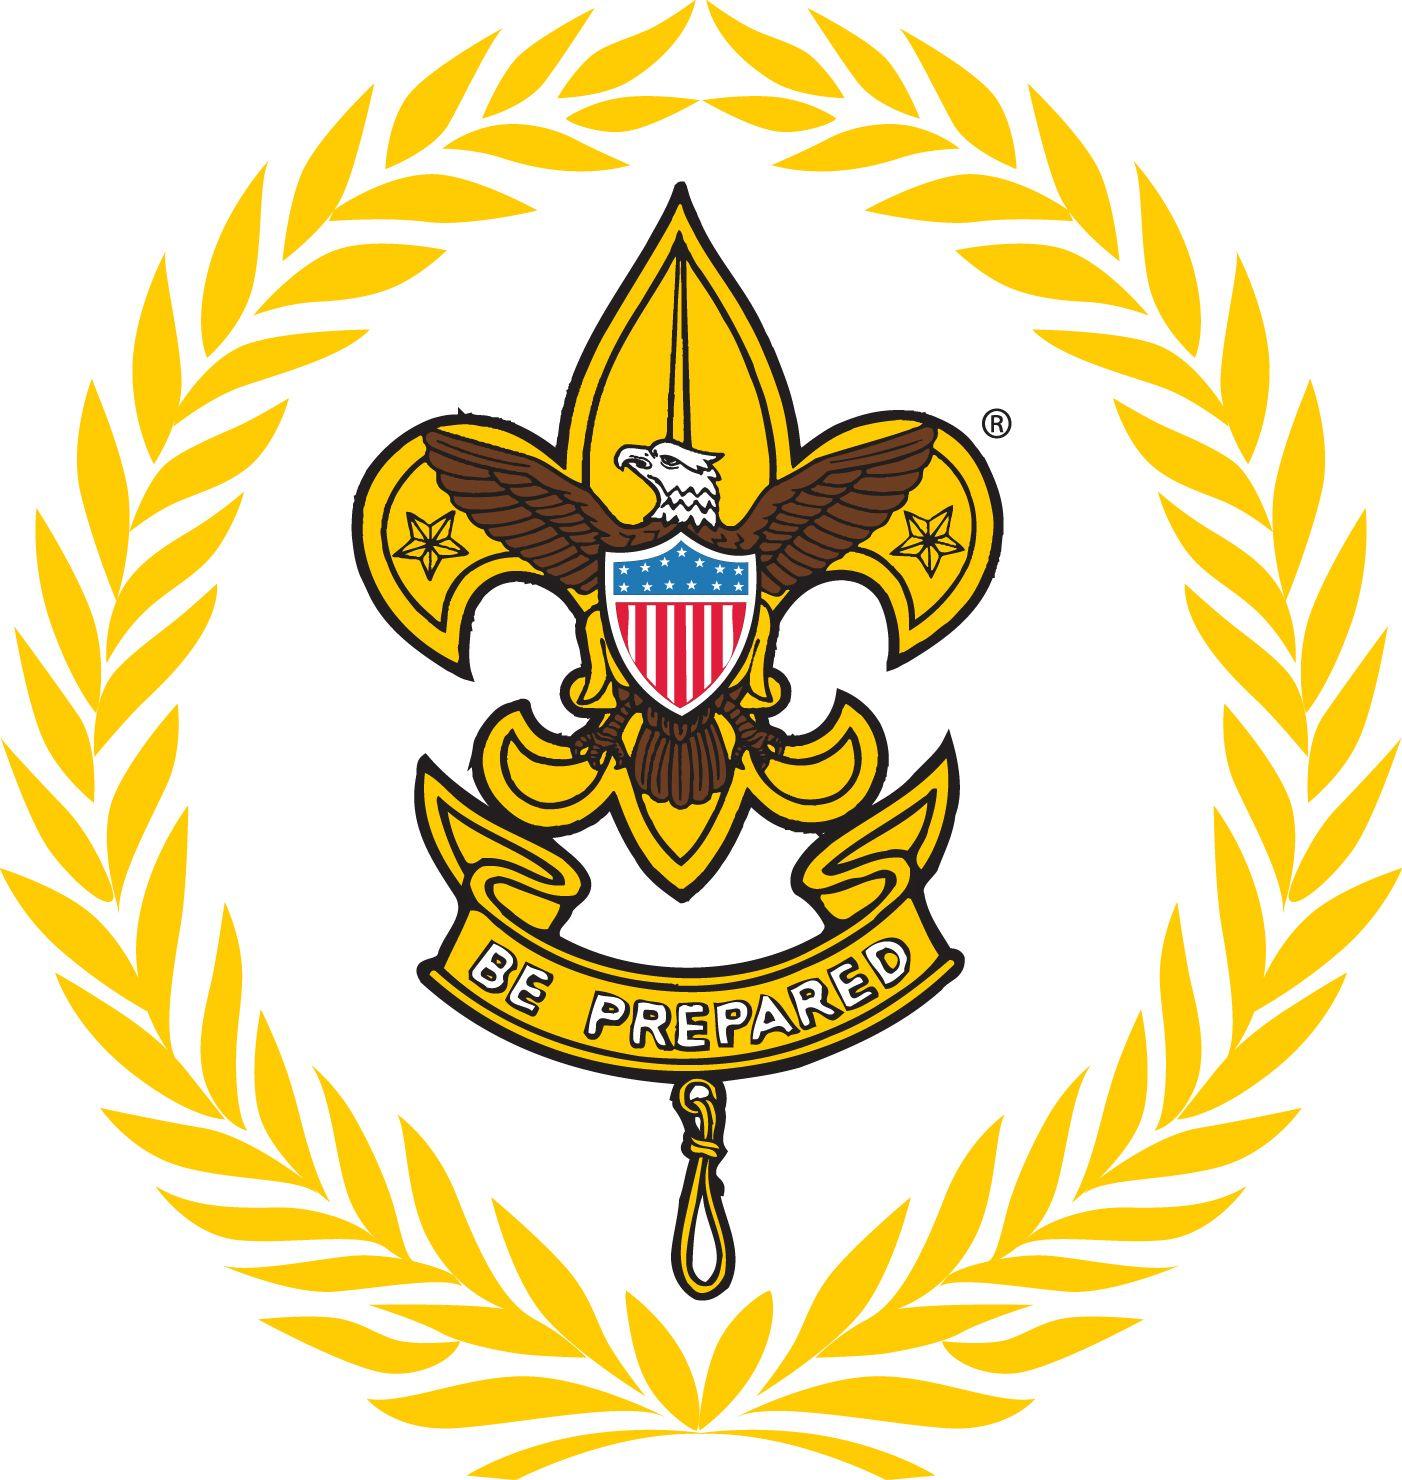 B.S.a Logo - Commissioner Logos. Boy Scouts of America